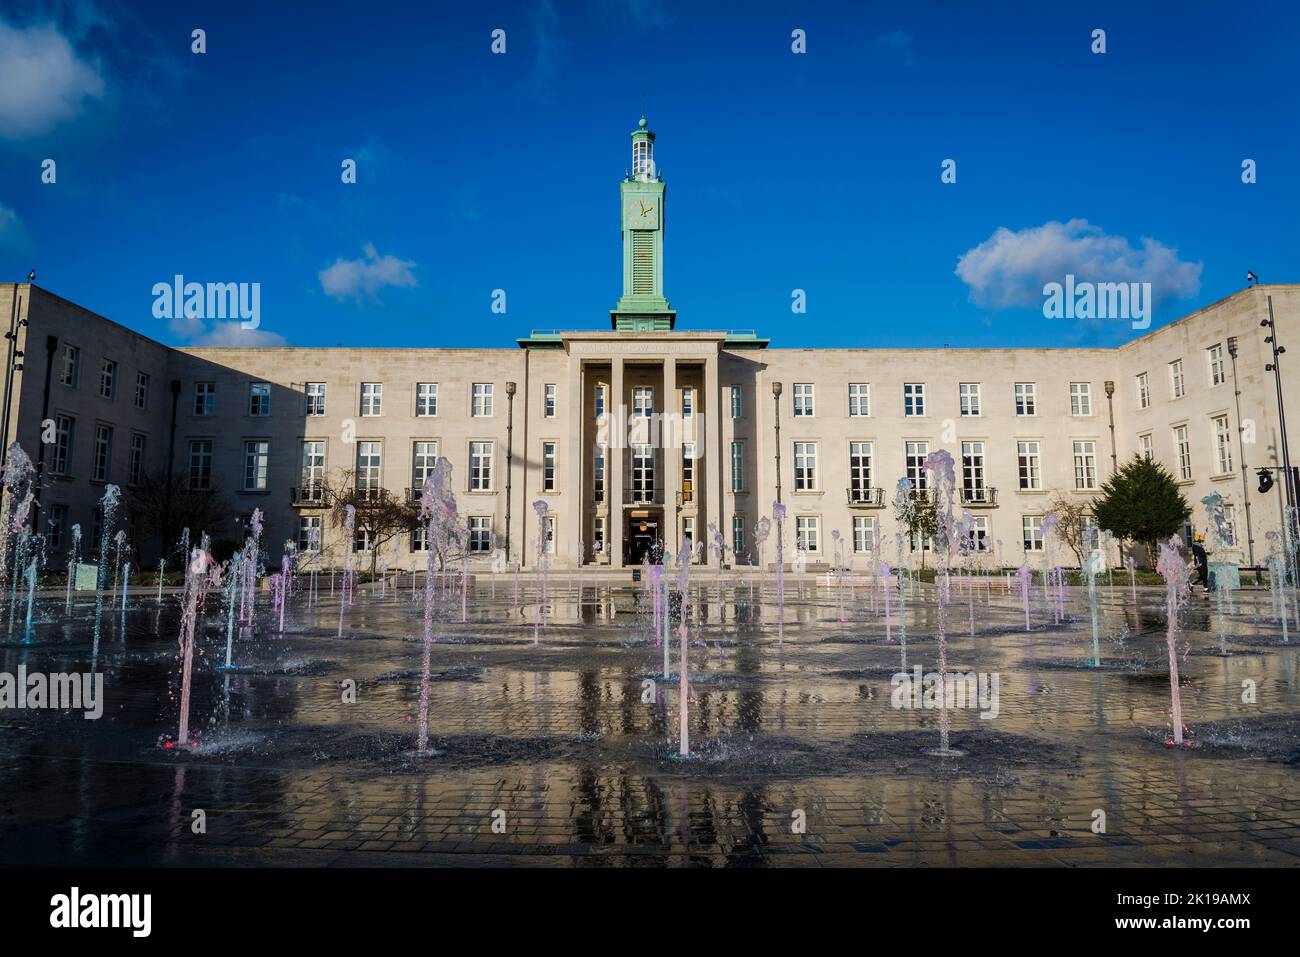 Fountain in front of Waltham Forest Town Hall, a Grade II Listed Building, built in 1942 in Stripped Classicism Architectural Style, Walthamstow, London, England, UK Stock Photo